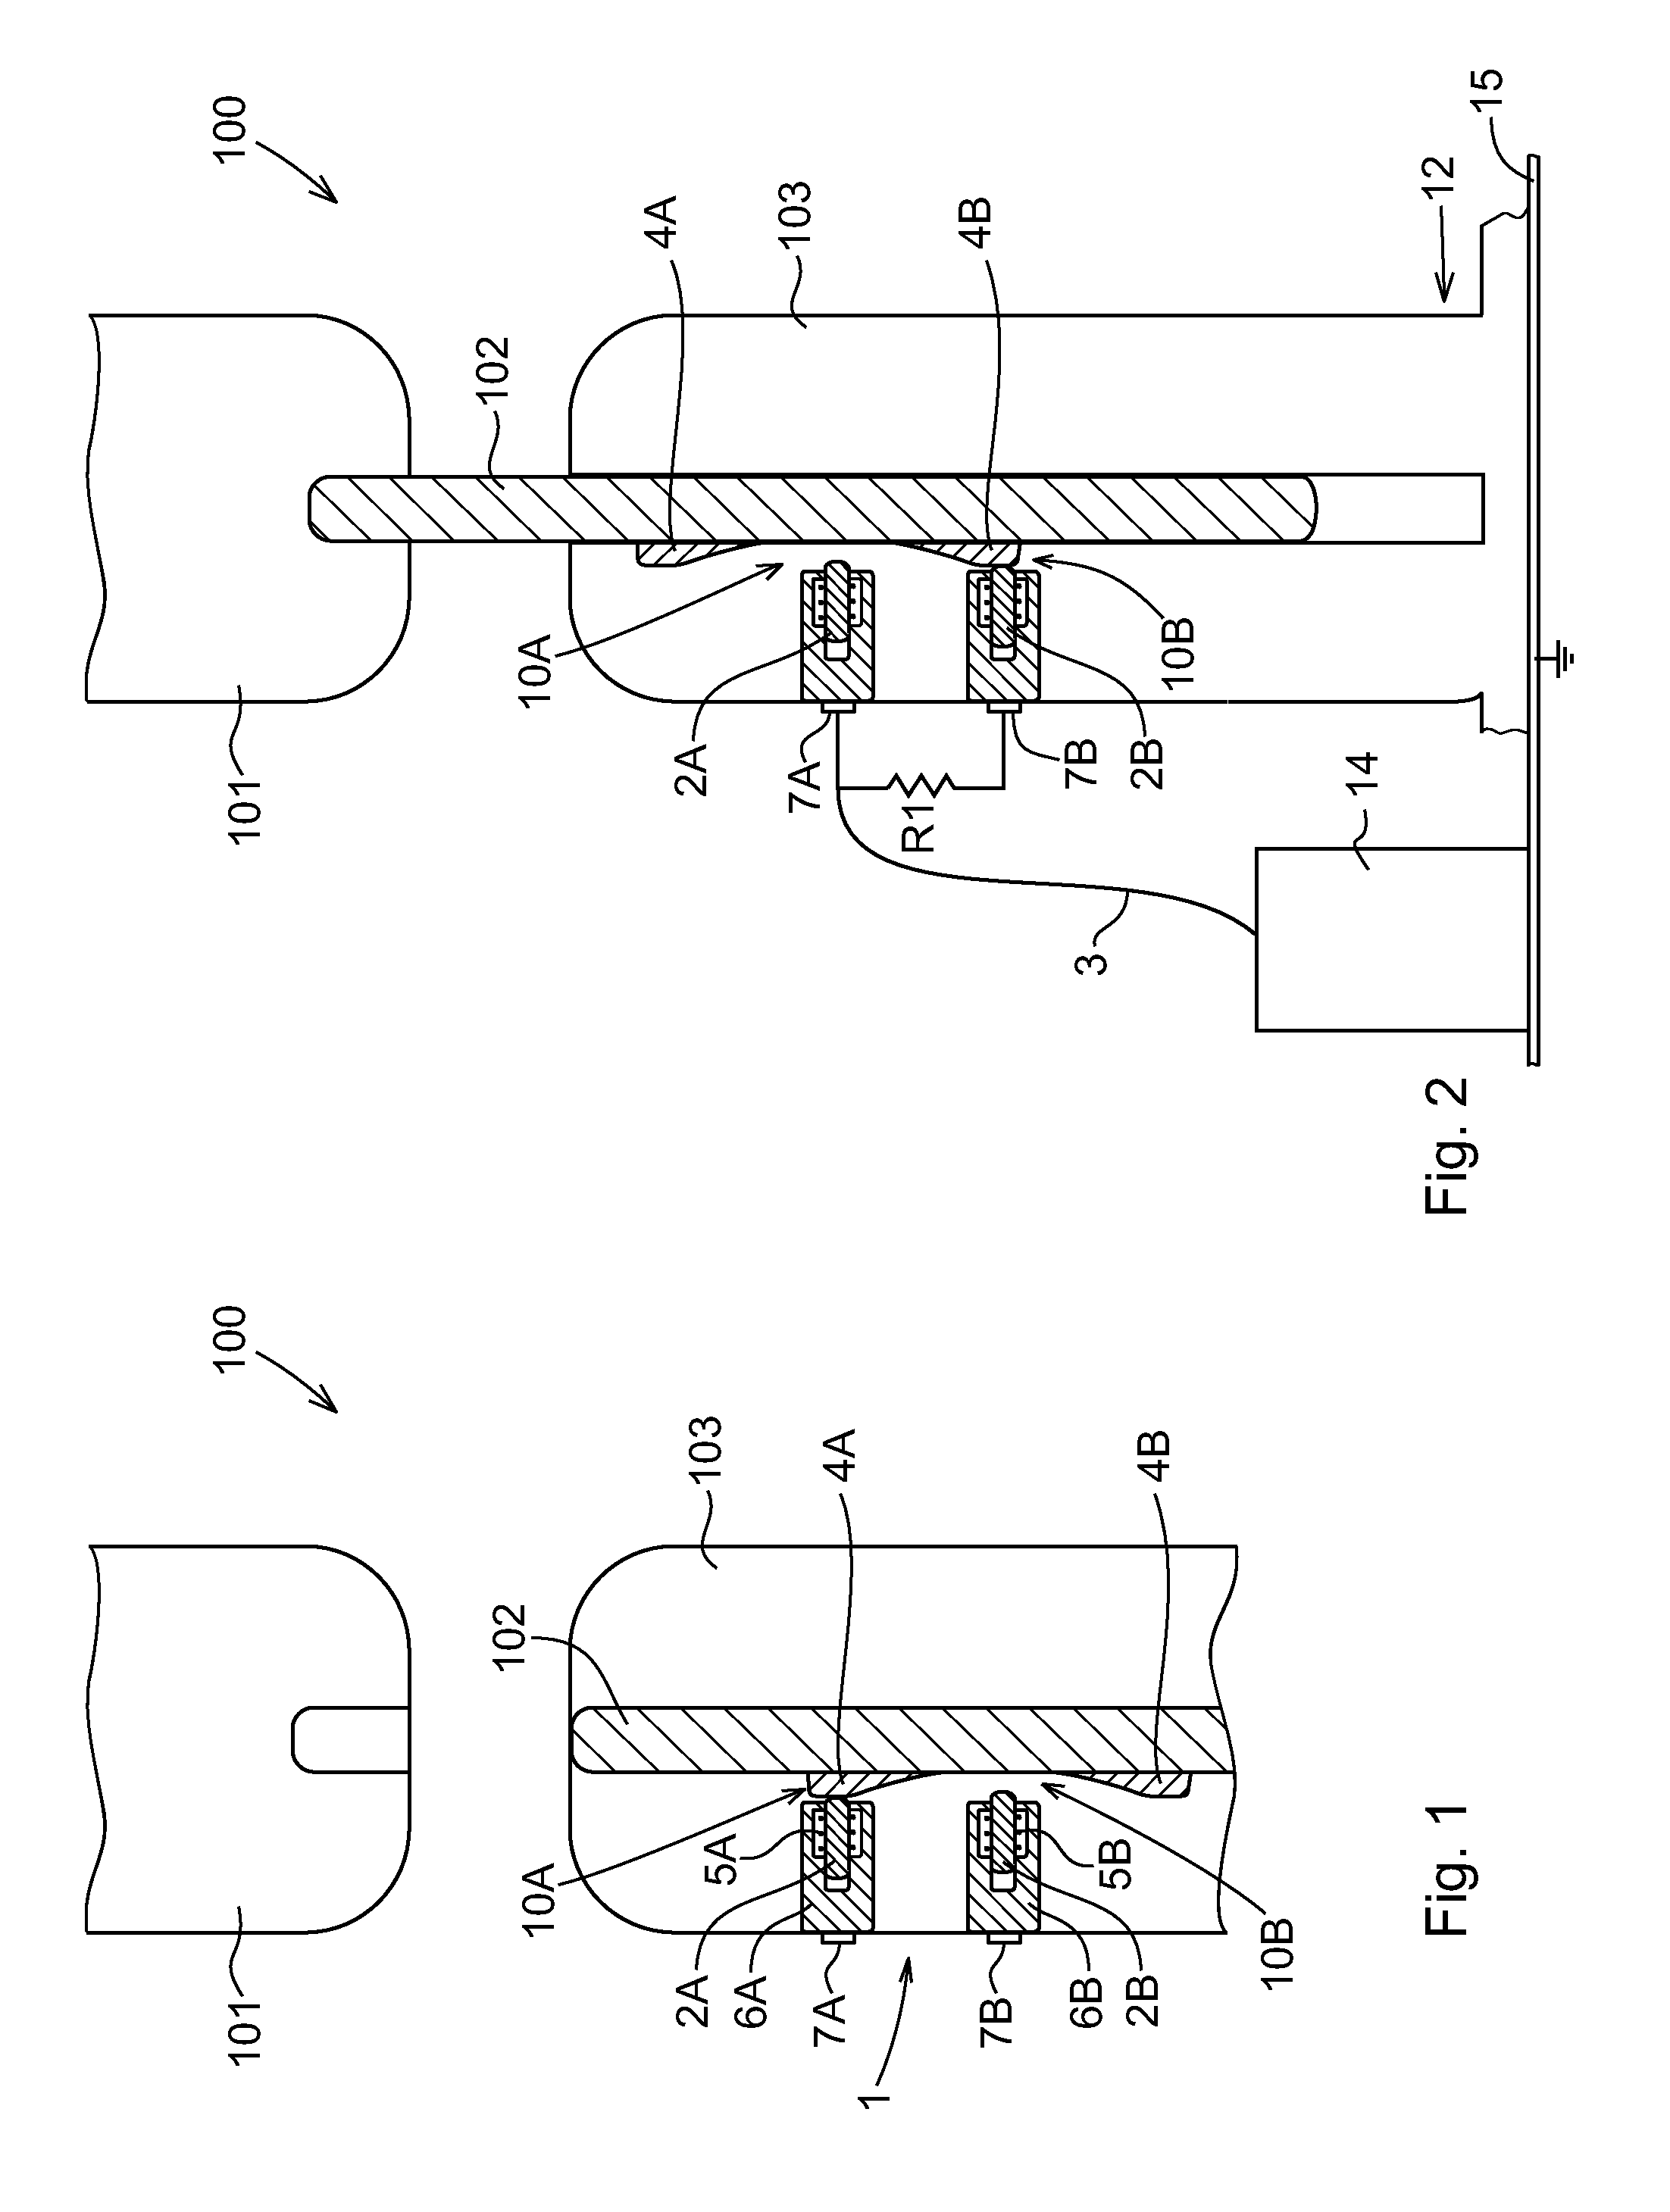 Device for indicating the state of a switching apparatus